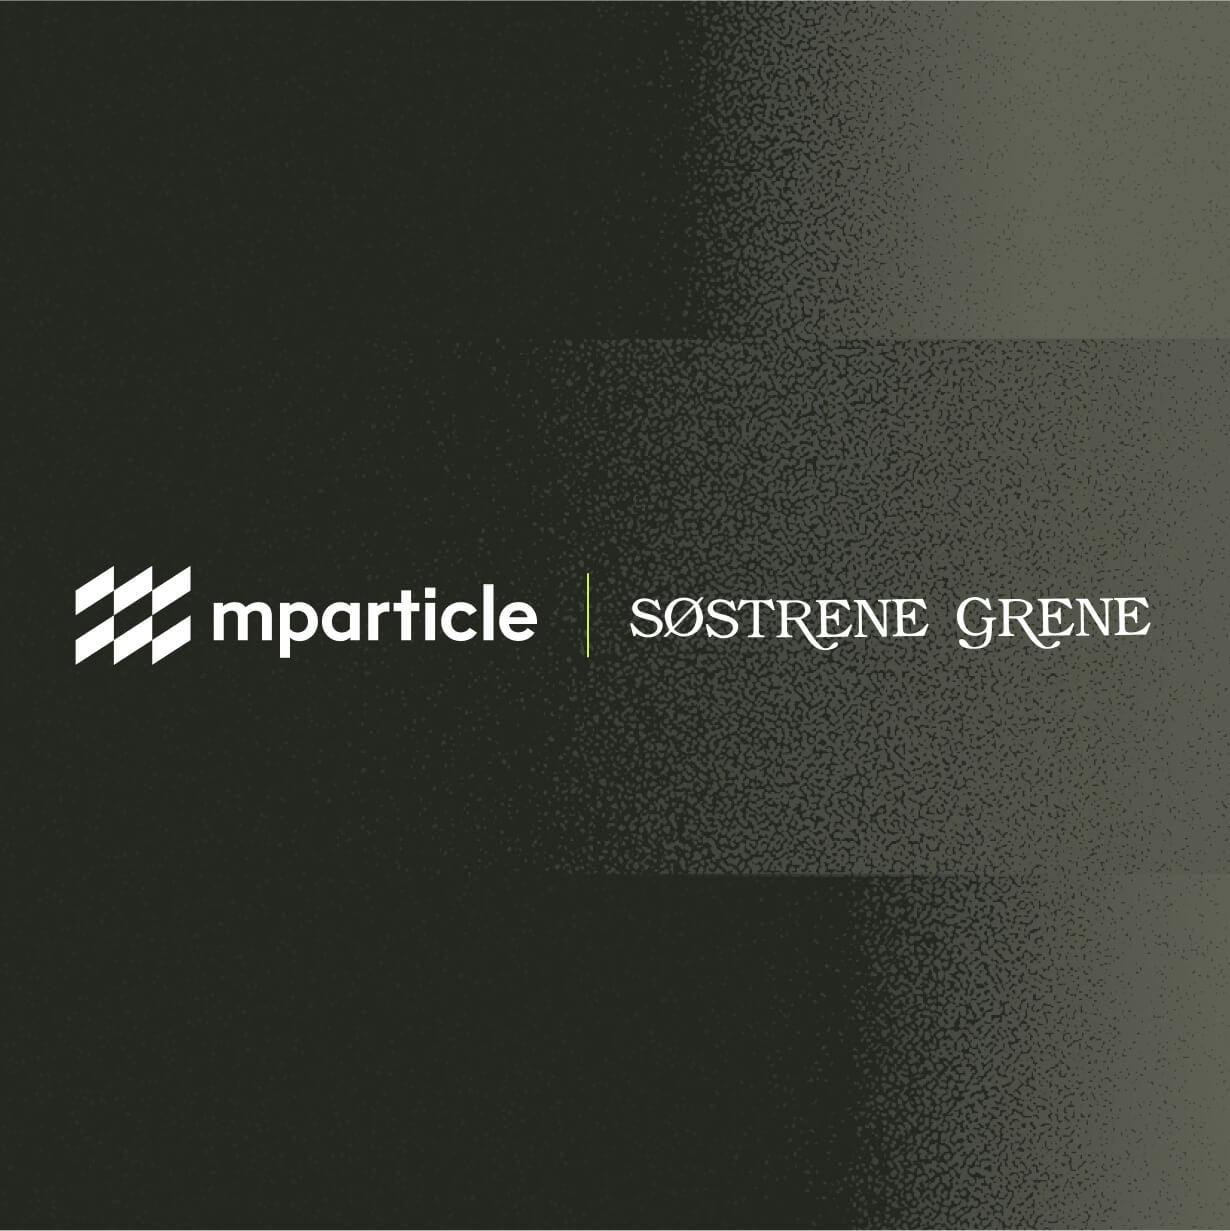 Danish retailer Søstrene Grene selects mParticle to bring hygge to omnichannel customer data